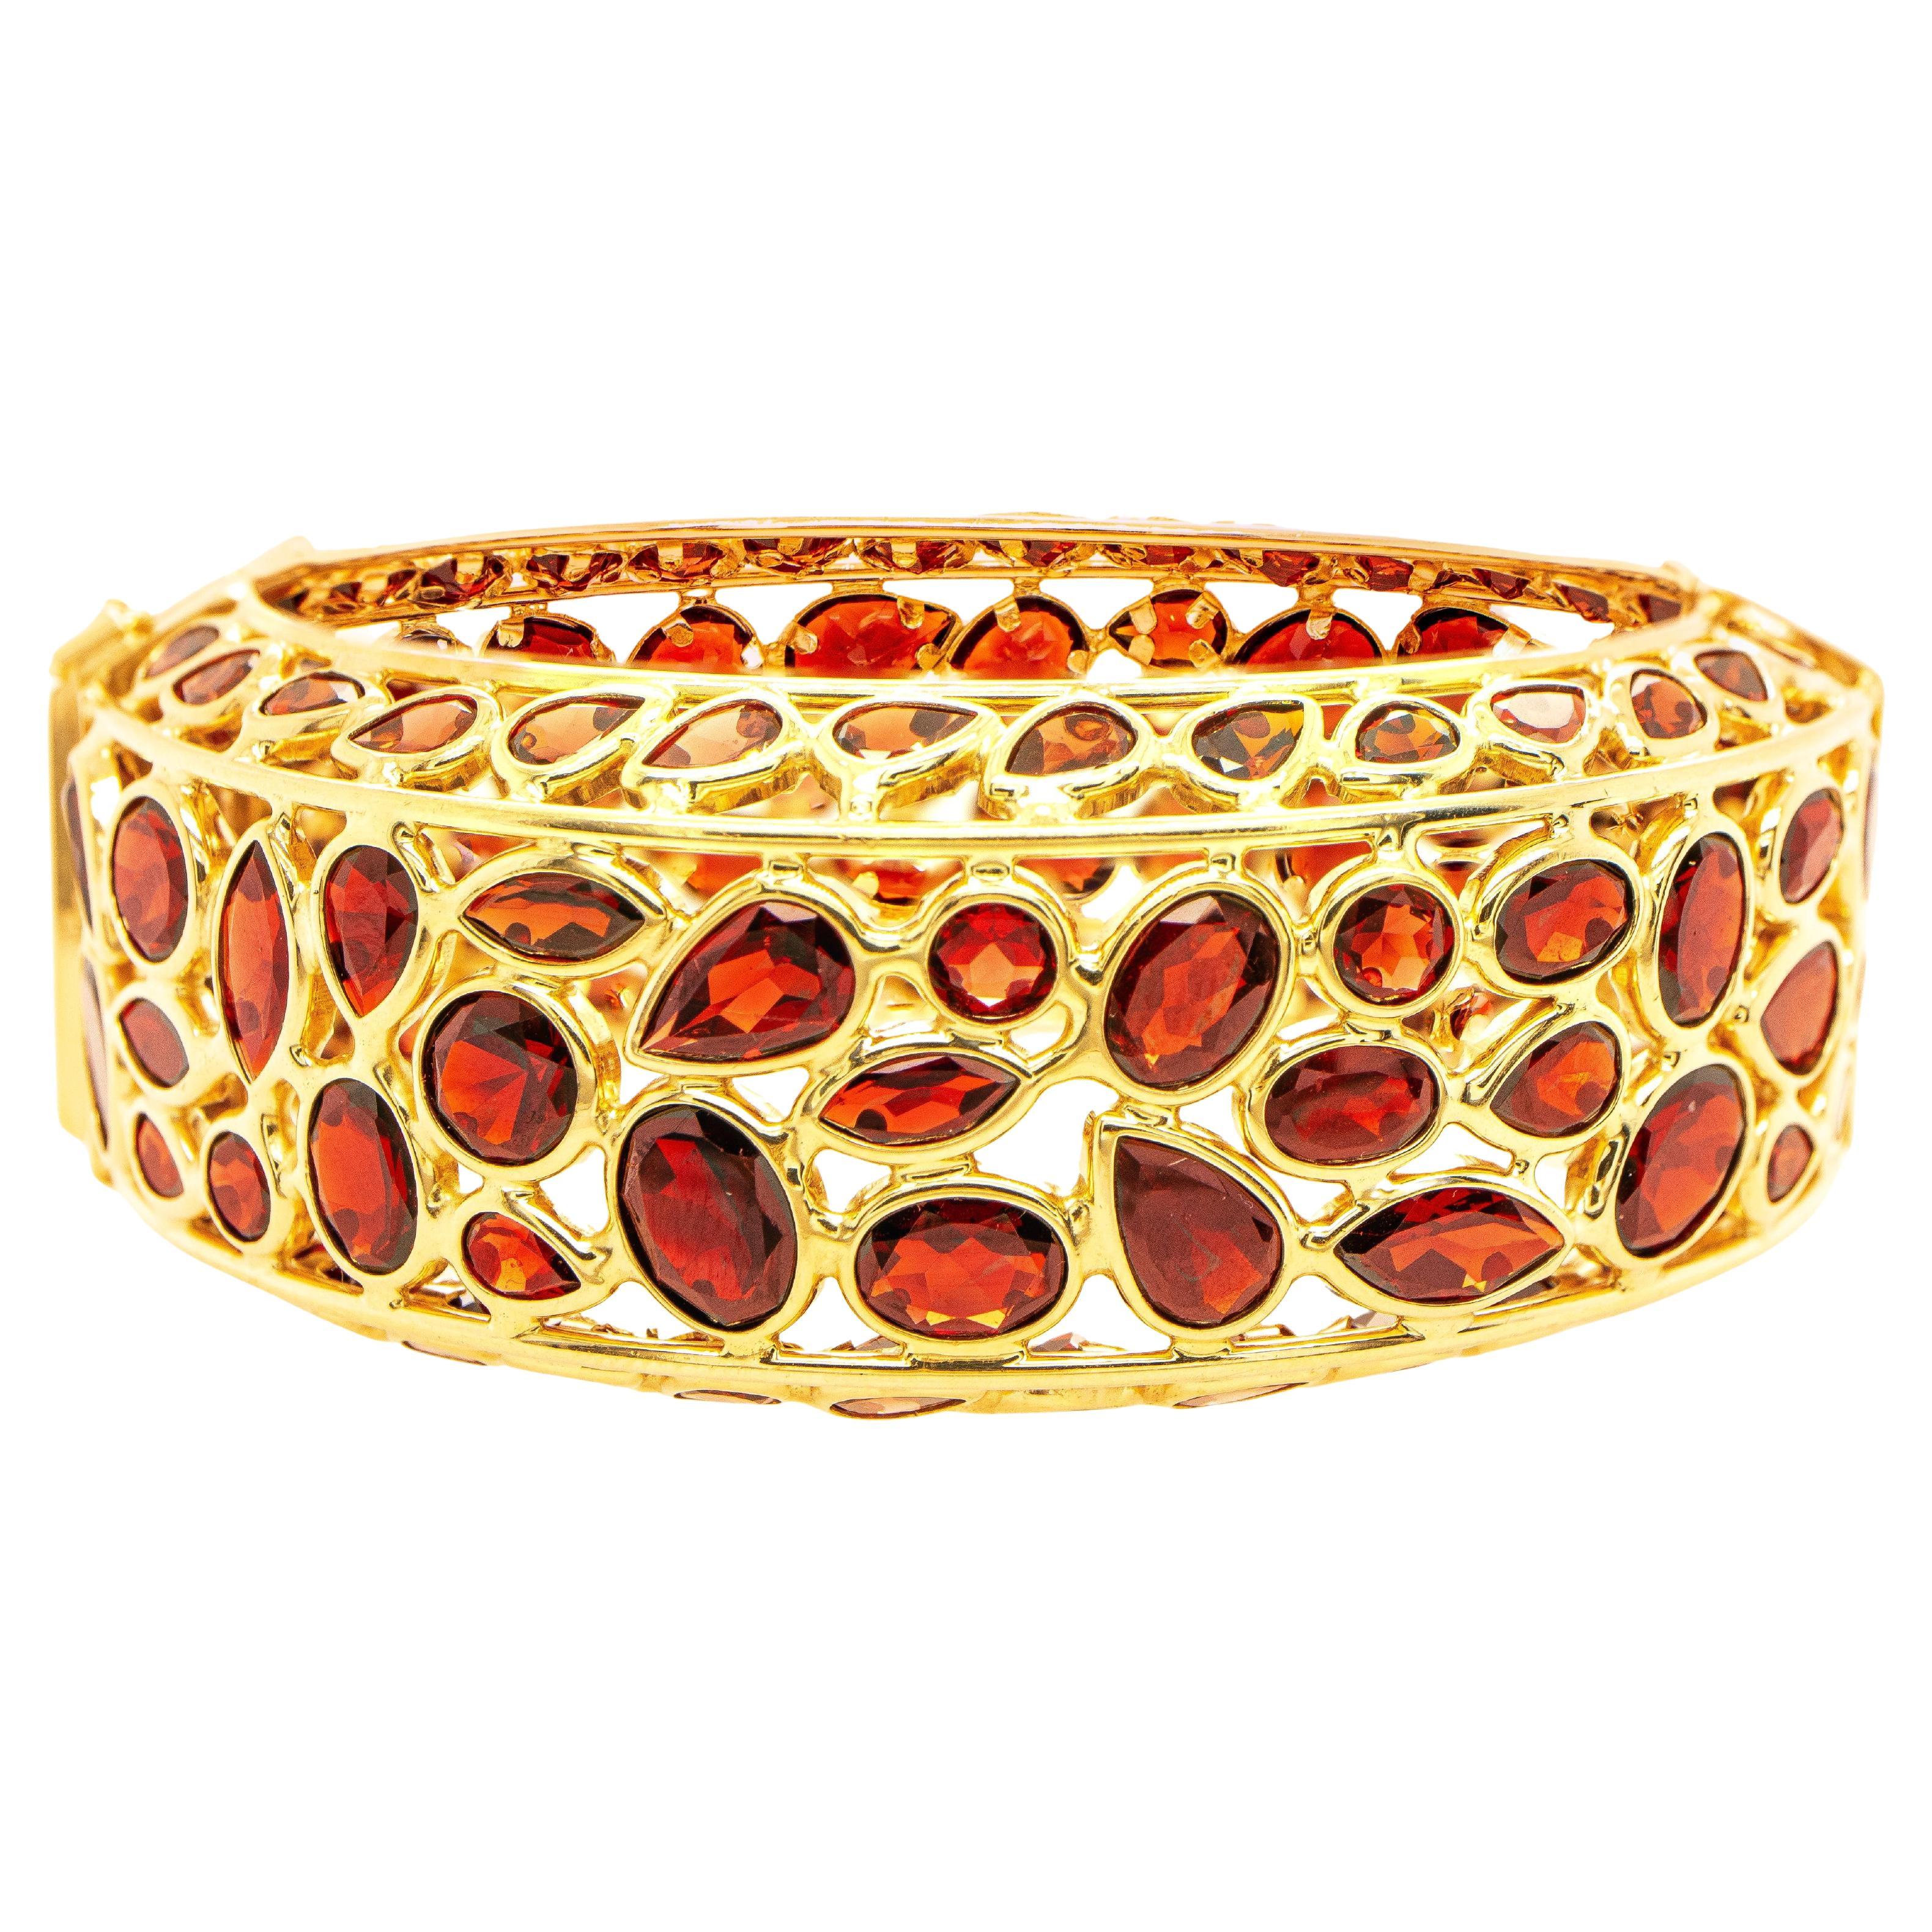 Important Cougar Bangle Bracelet Red Garnets 100 Carats 14K Yellow Gold For Sale 2